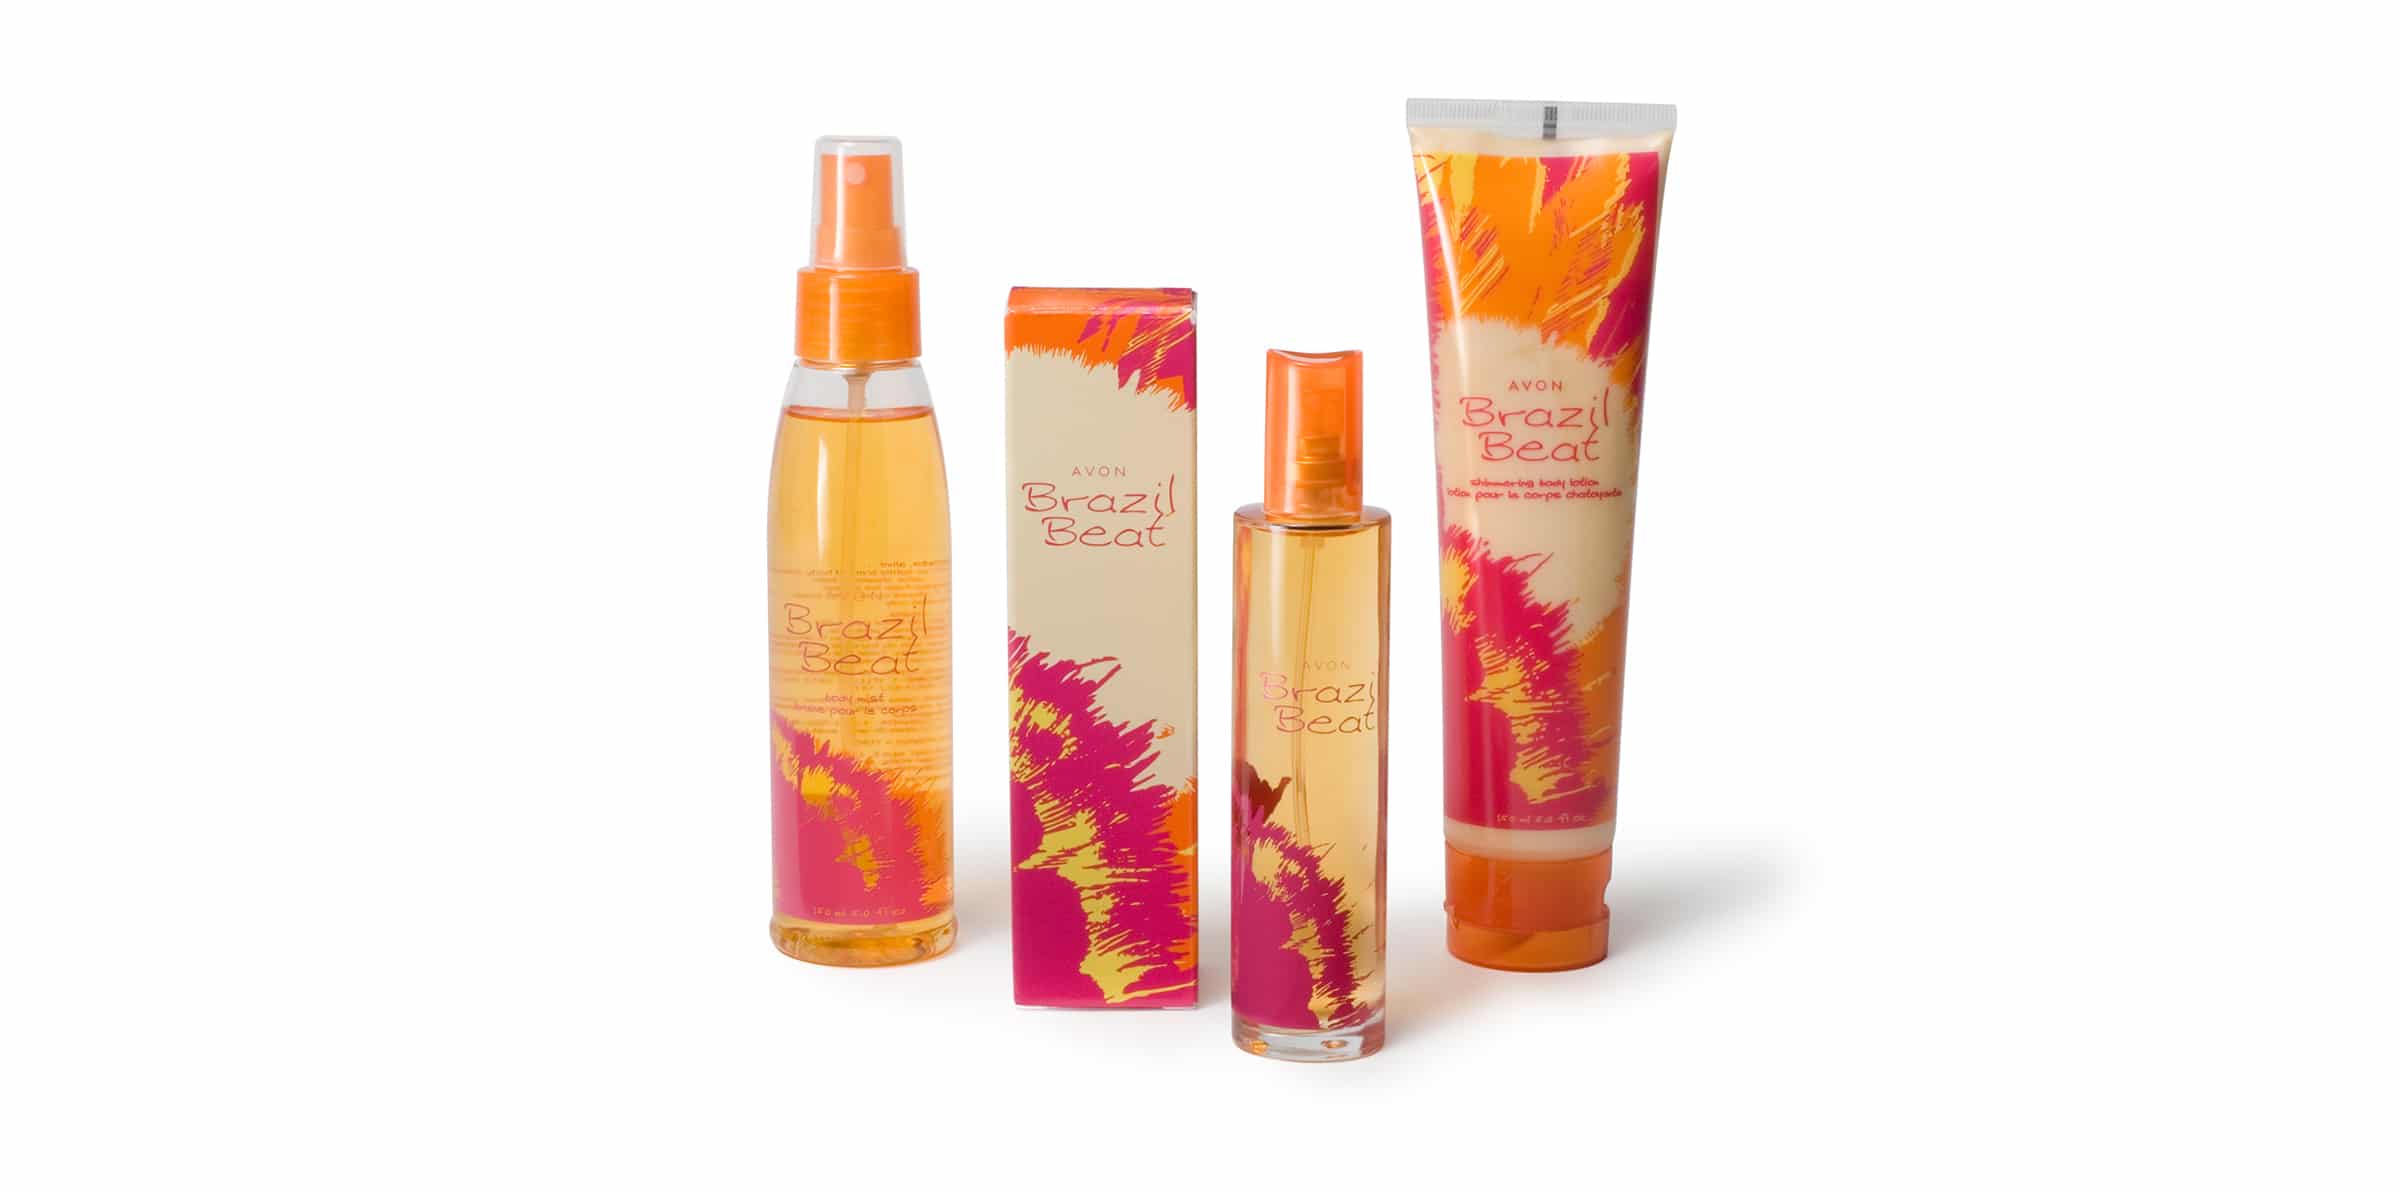 Perfume Creative Packaging Design: Avon Brazil Beat fragrance bottle design with vibrant oranges and magenta feathered details.